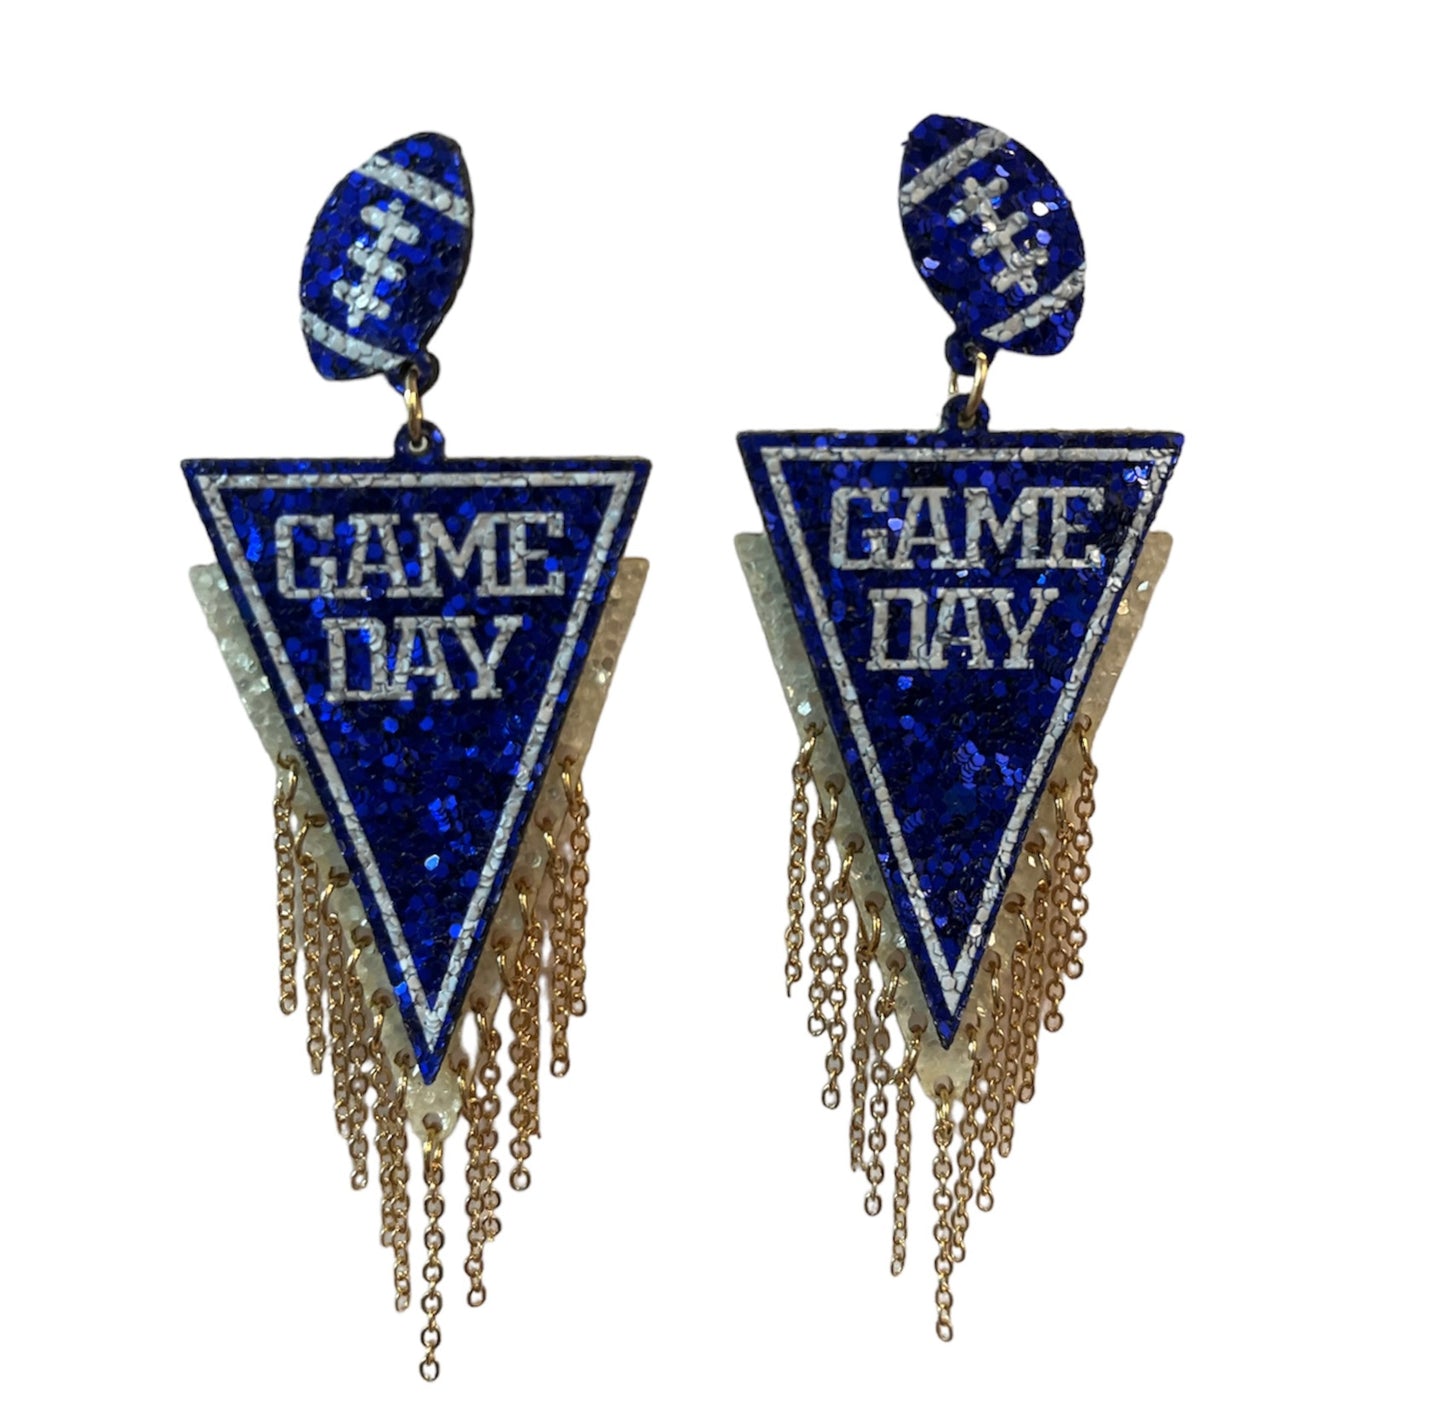 Glitter Game Day with Gold Chain Tassel Earrings-Blue